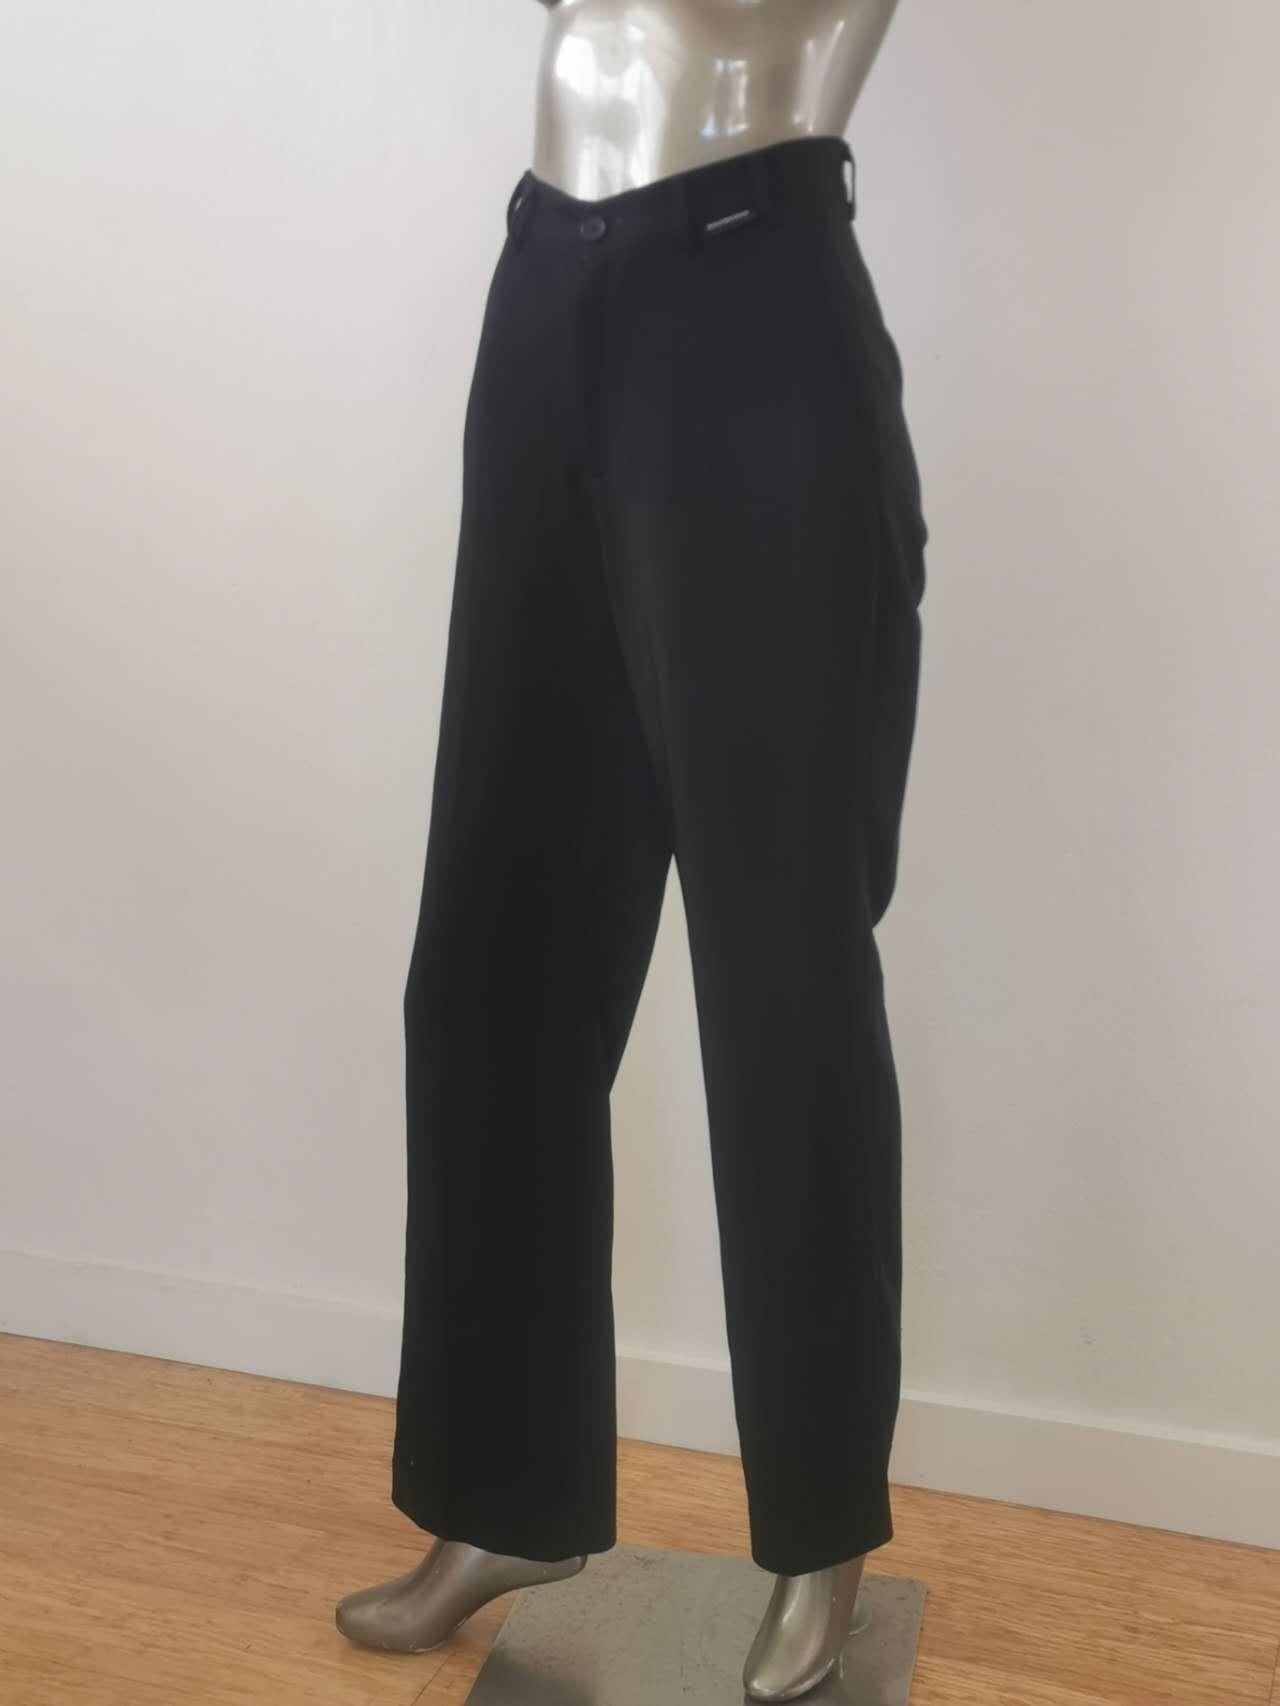 Brand: Balenciaga
Product Name: Black Wide Leg Tailored Pants SZ 34

Product Description:
Elevate your style with these Balenciaga Black Wide Leg Tailored Pants. Crafted with meticulous attention to detail, these pants offer a sleek and